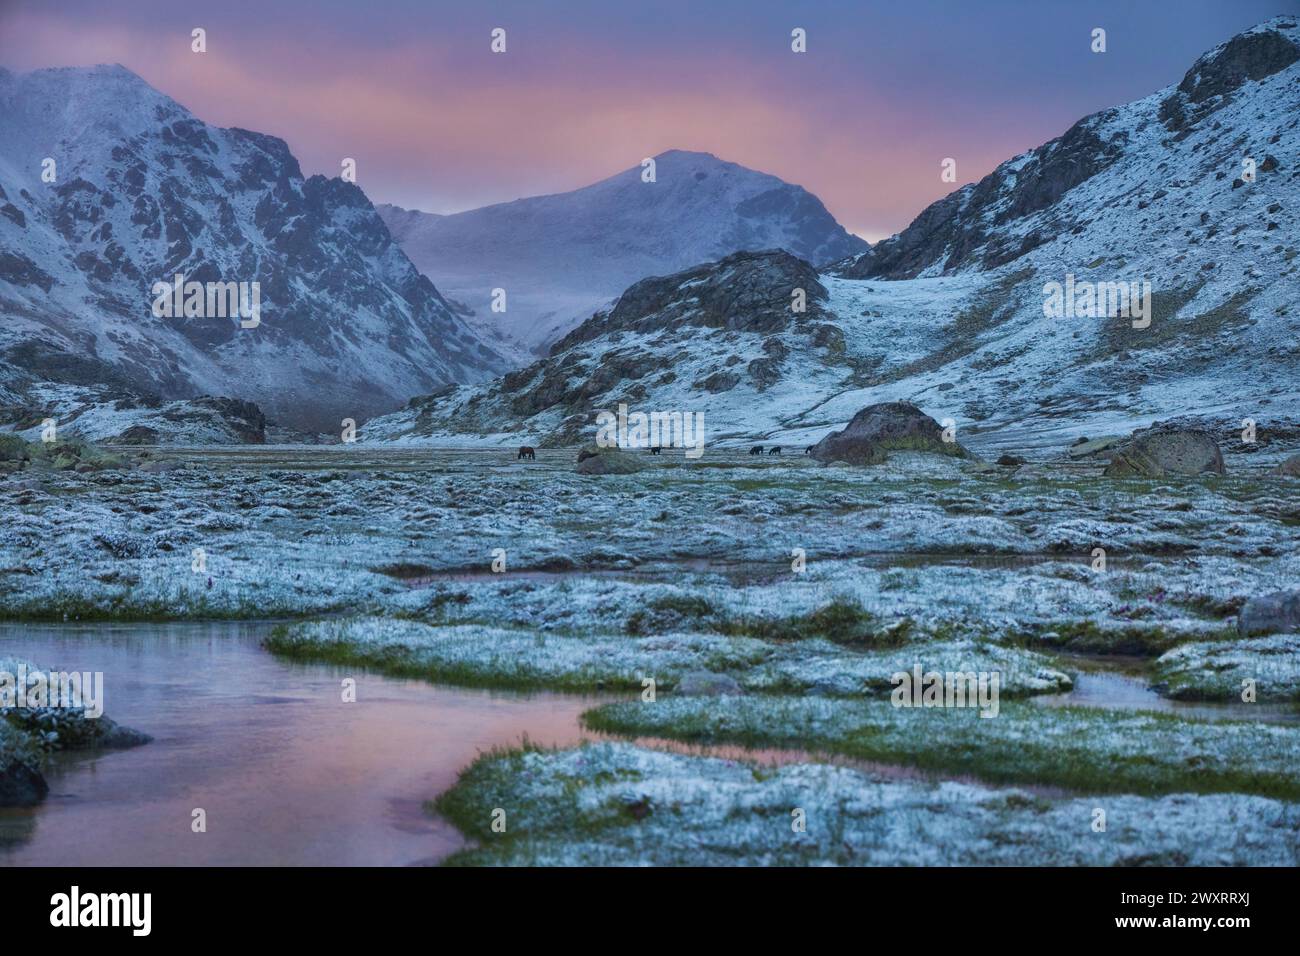 Twilight descends on a tranquil mountain valley with snow-capped peaks and a gentle river Stock Photo